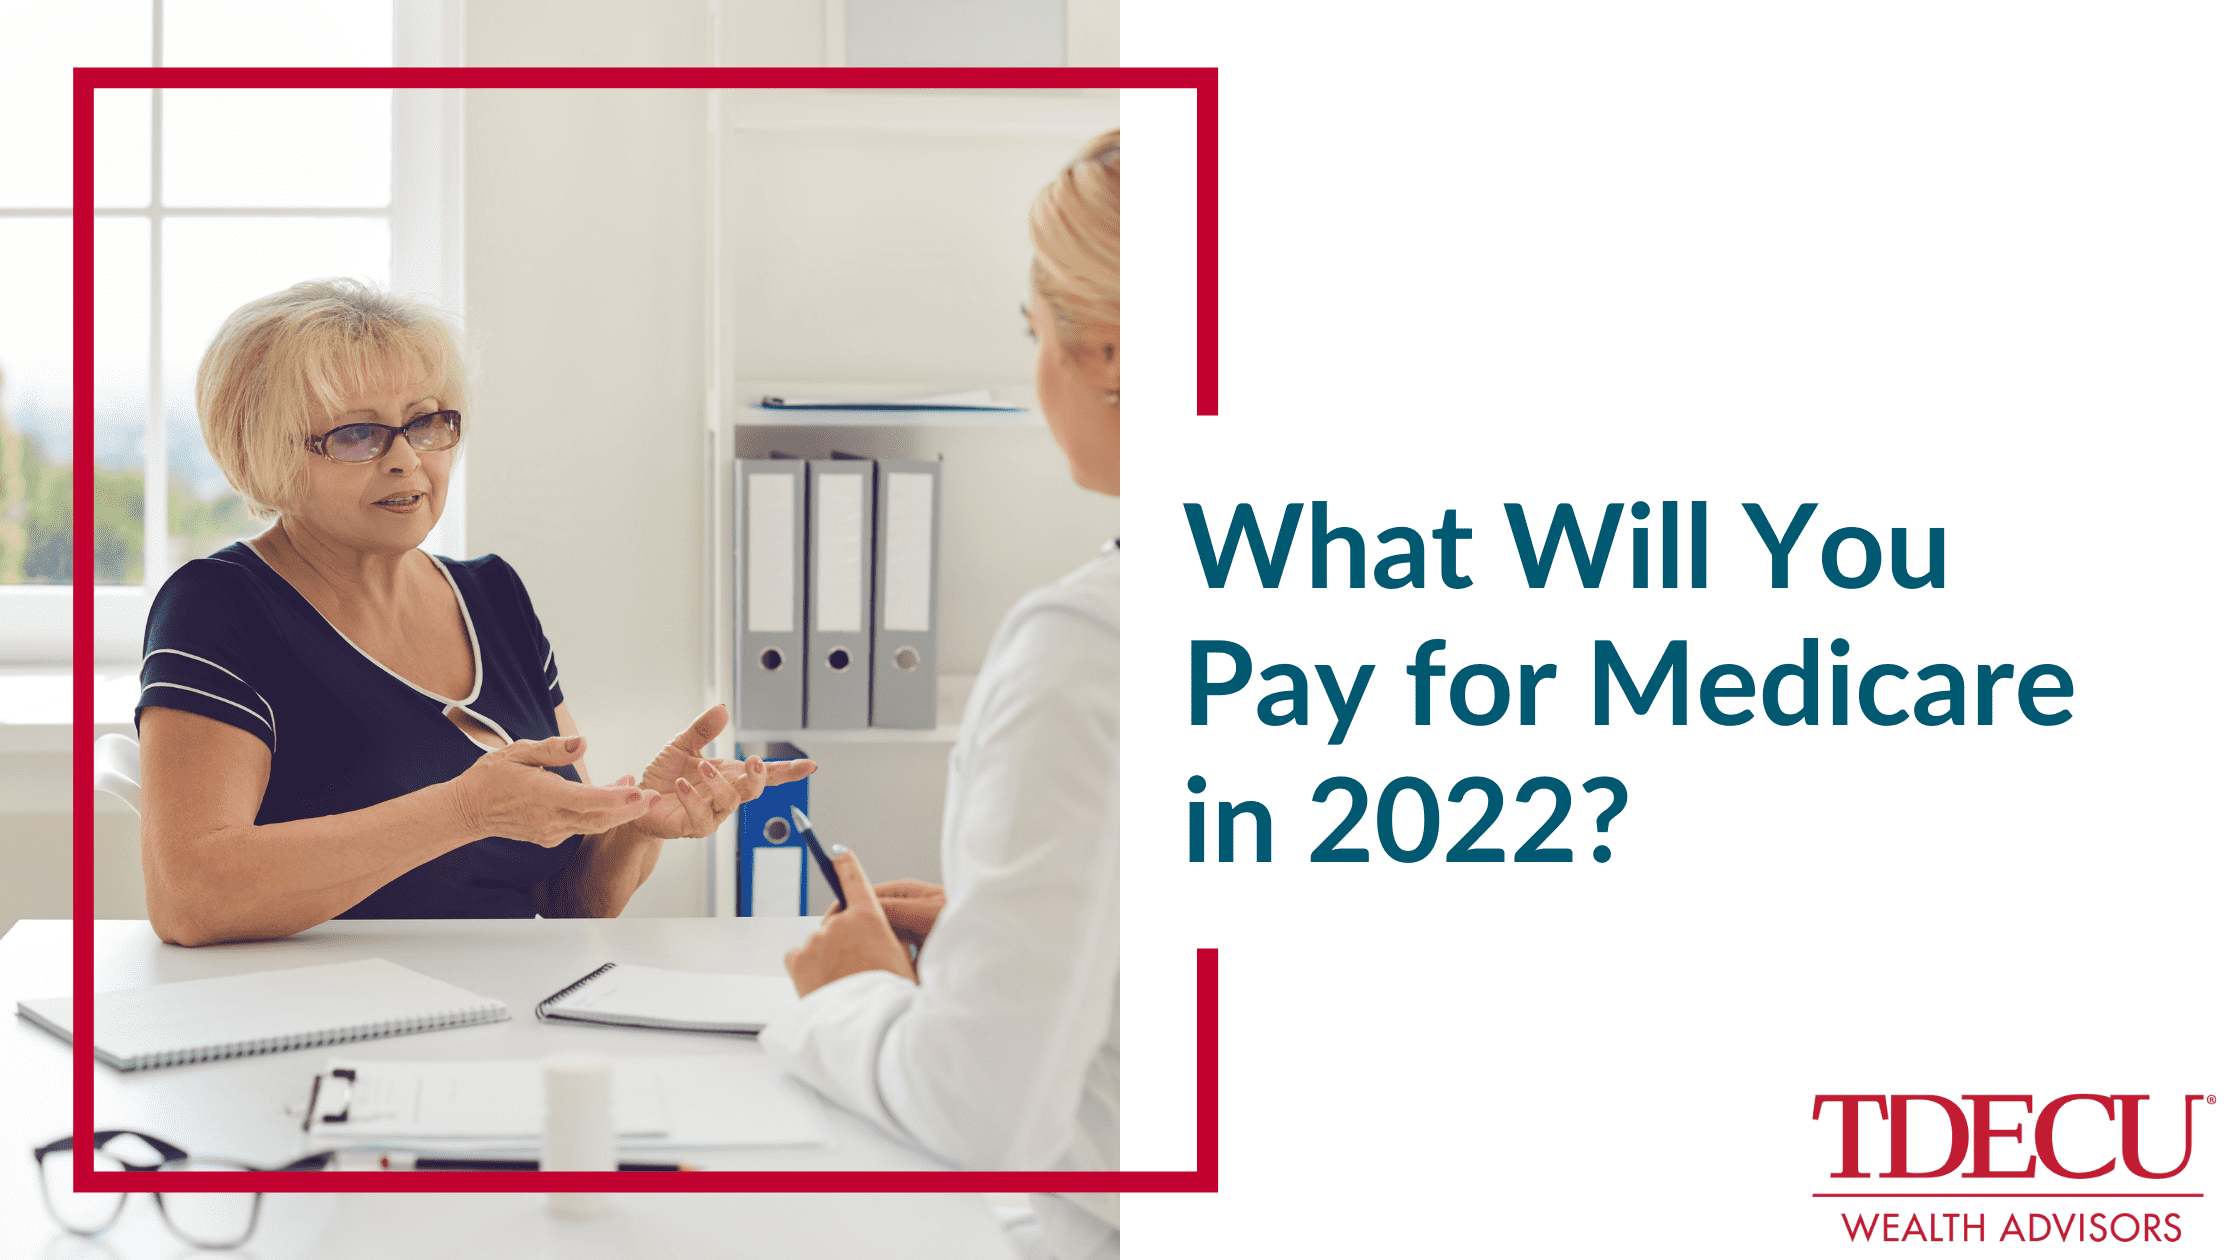 What Will You Pay for Medicare in 2022?